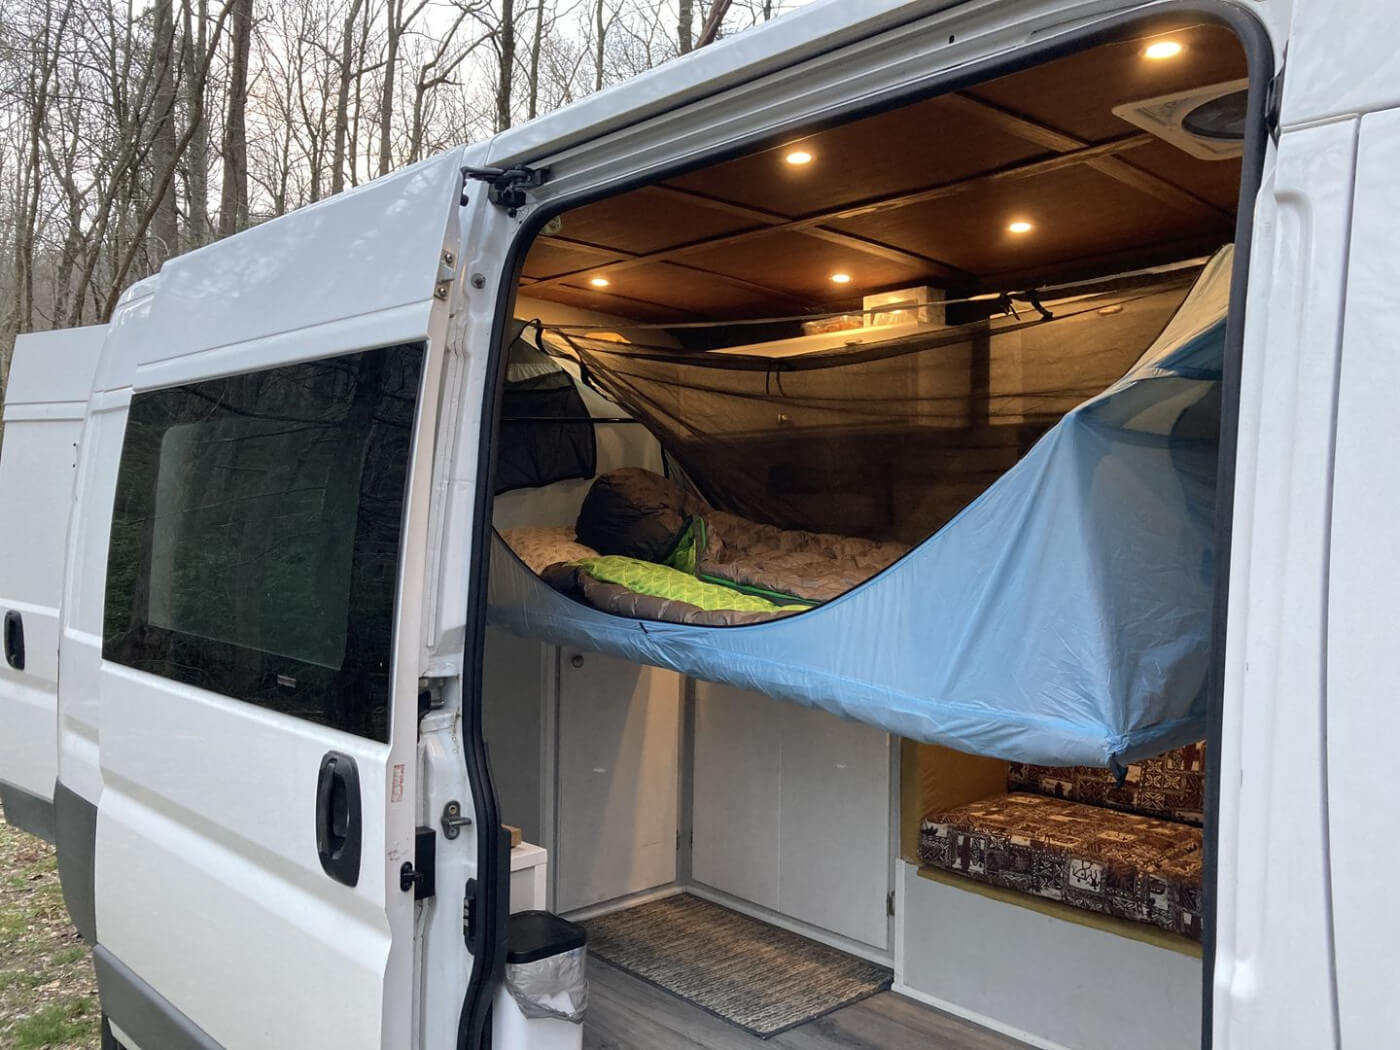 A haven tent hammock hanging from inside a van